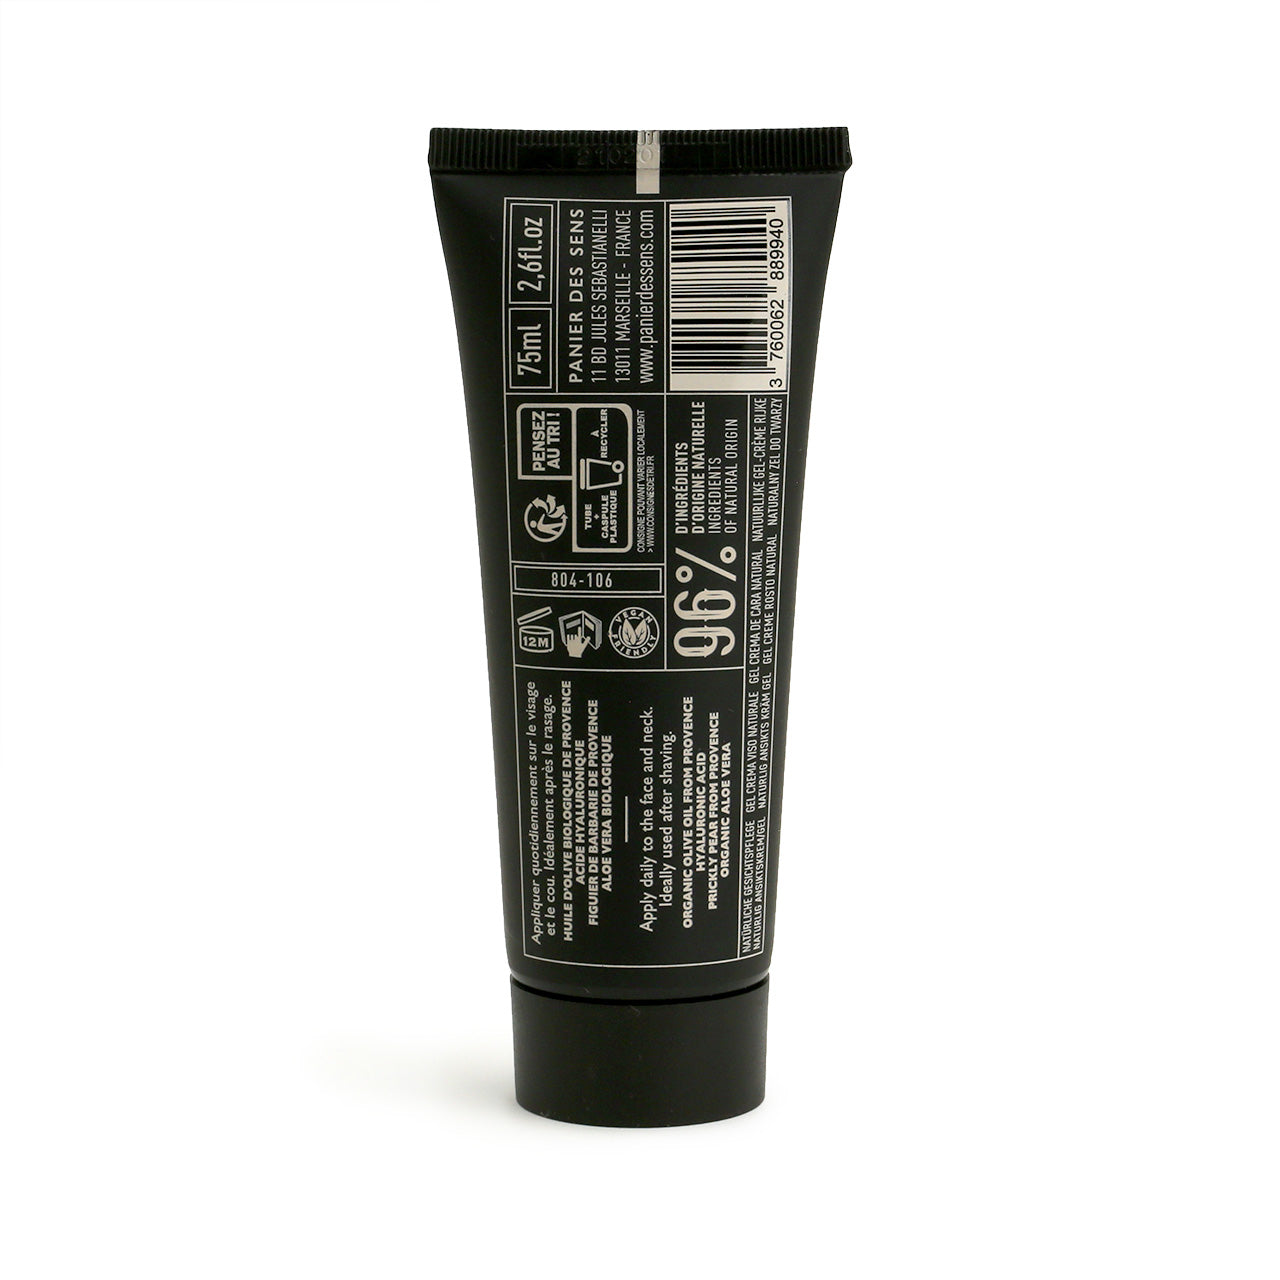 Face cream gel from Panier des Sens L'Olivier Homme, black tupbe with cream, gold and black graphics